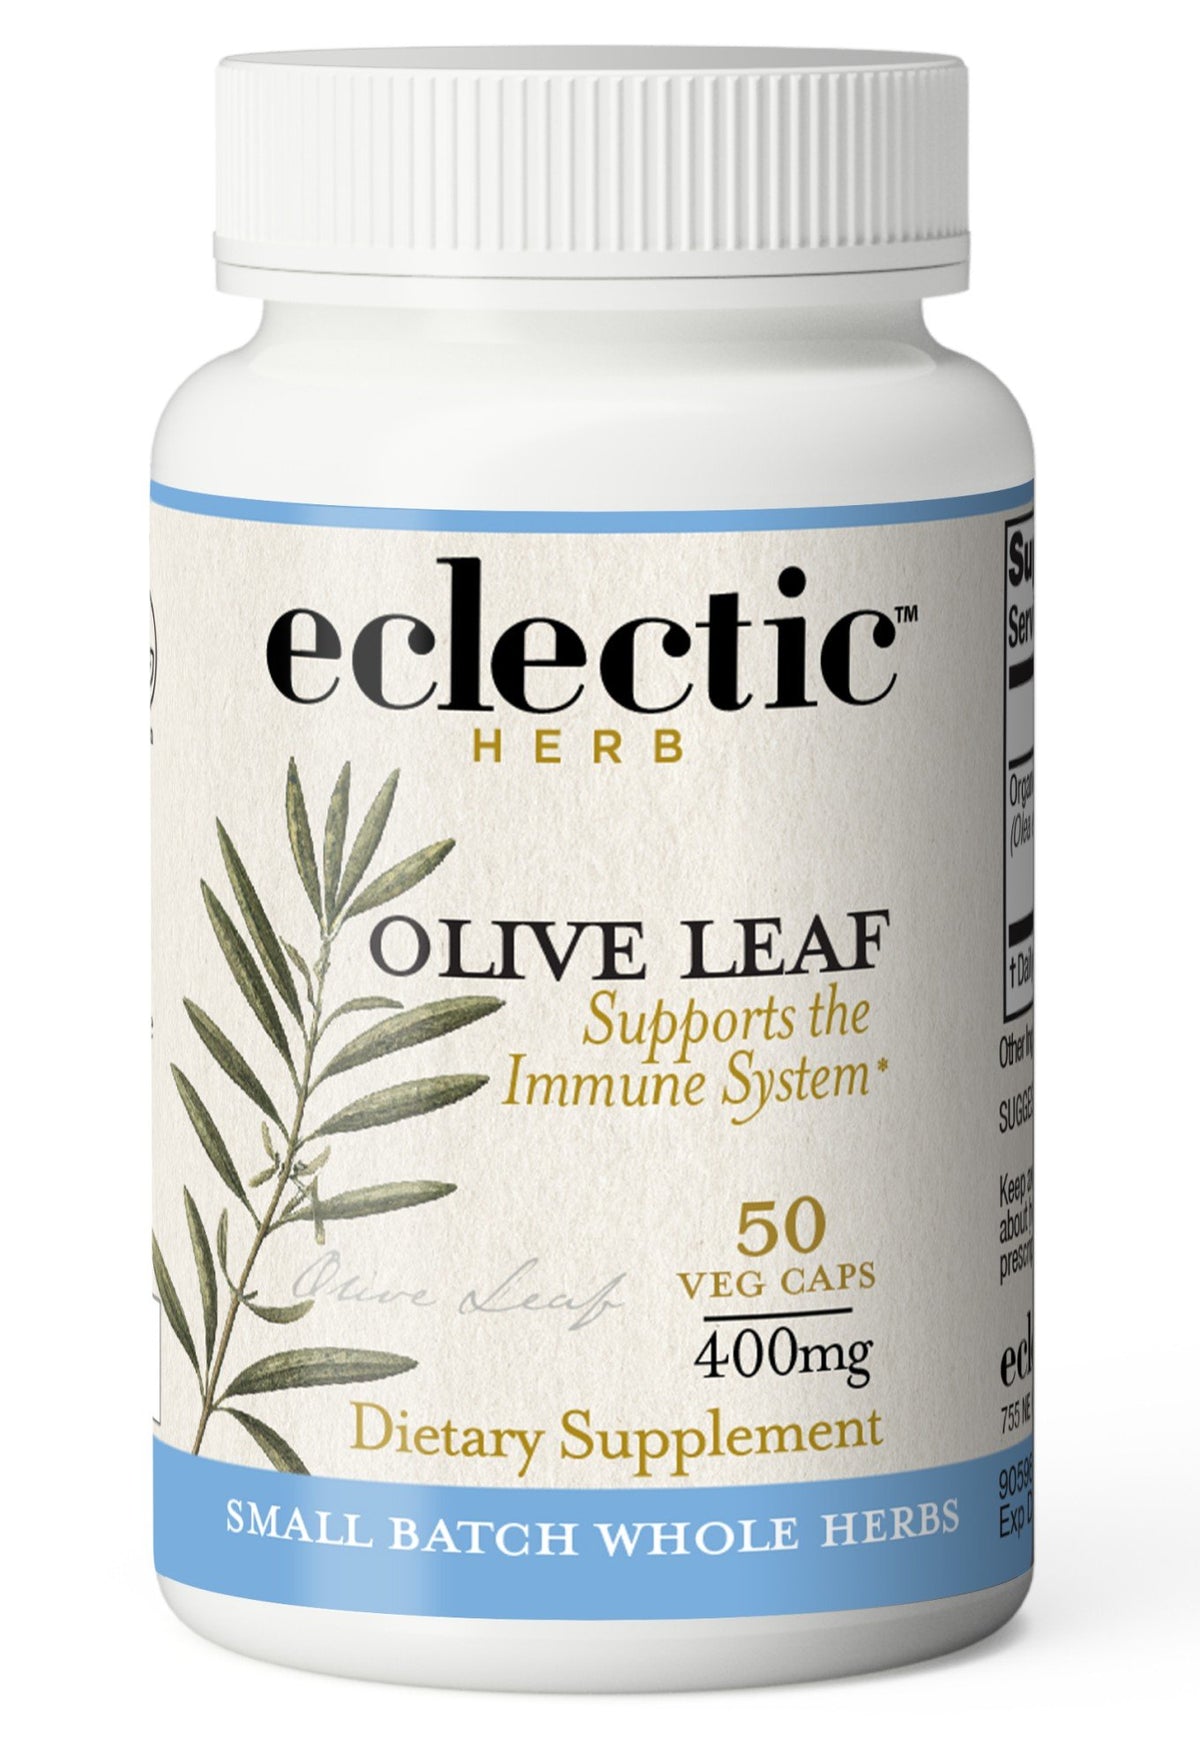 Eclectic Herb Olive Leaf 50 Capsule